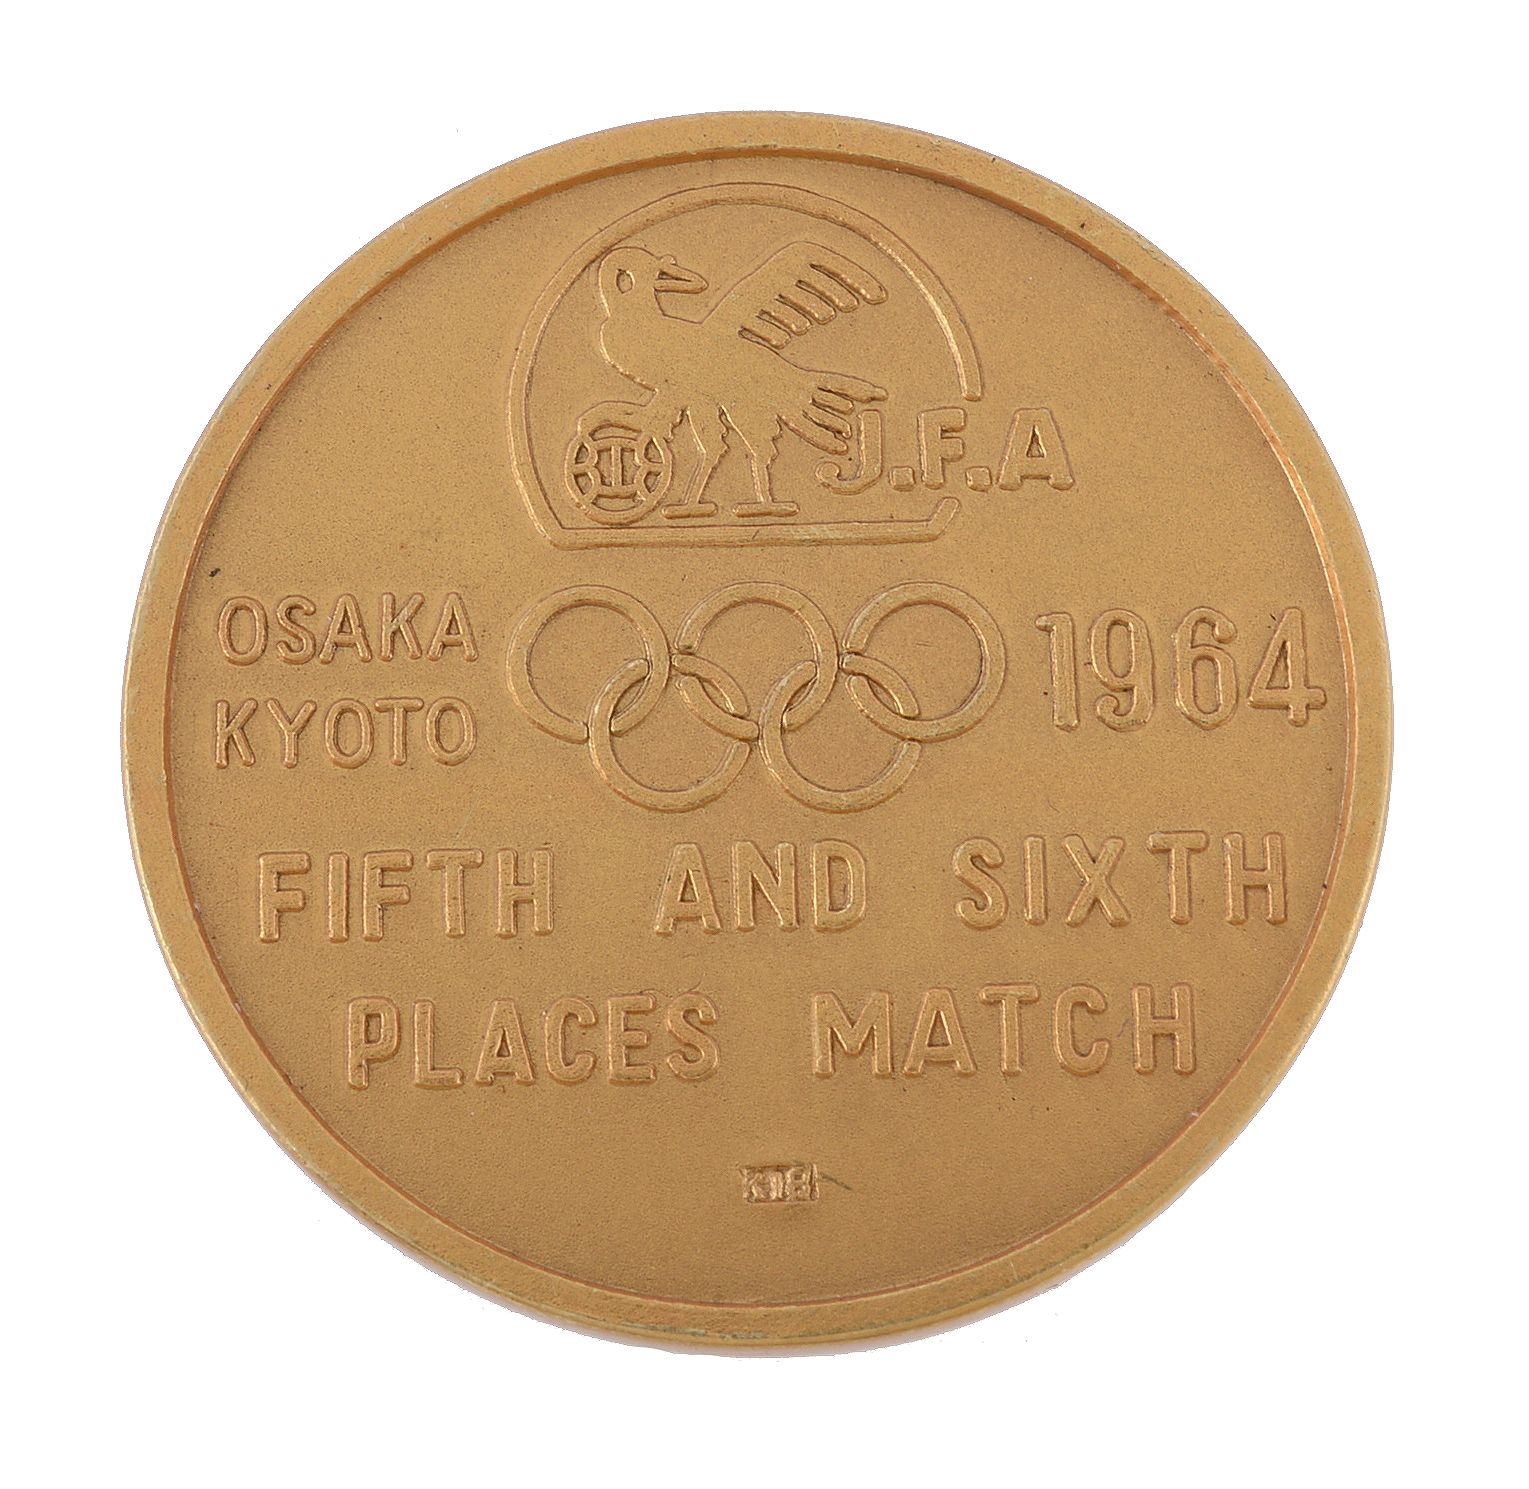 Japan, Olympic Games 1964, Osaka Football Tournament, 18 carat gold medal, two footballers, rev. - Image 2 of 2